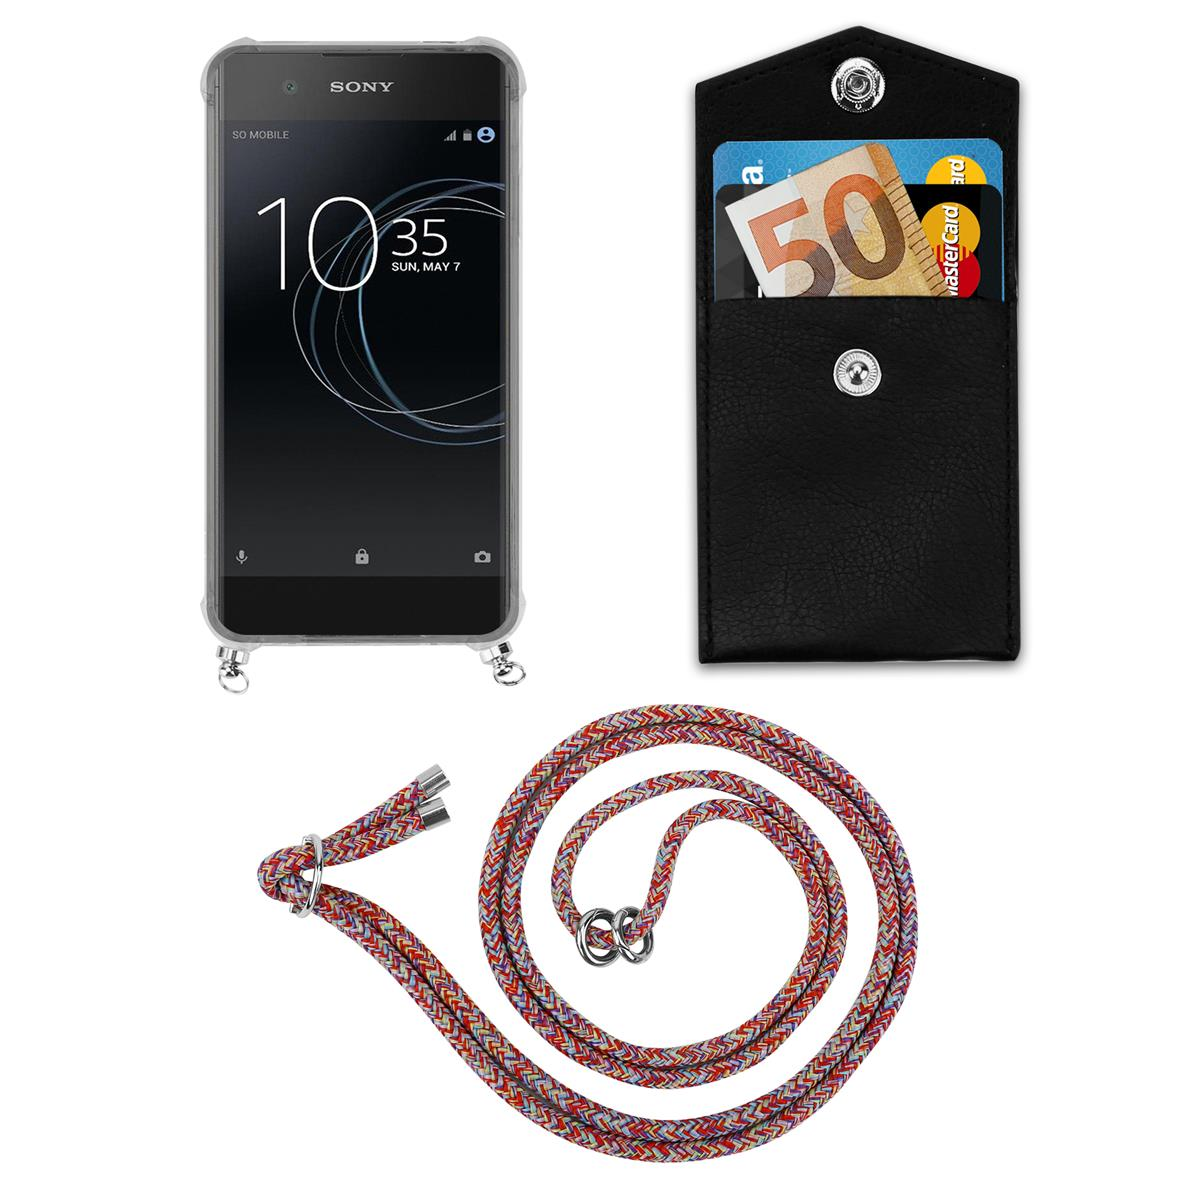 und COLORFUL Silber Xperia Sony, Kordel Band Ringen, PLUS, mit abnehmbarer Backcover, Handy Hülle, PARROT Kette CADORABO XA1